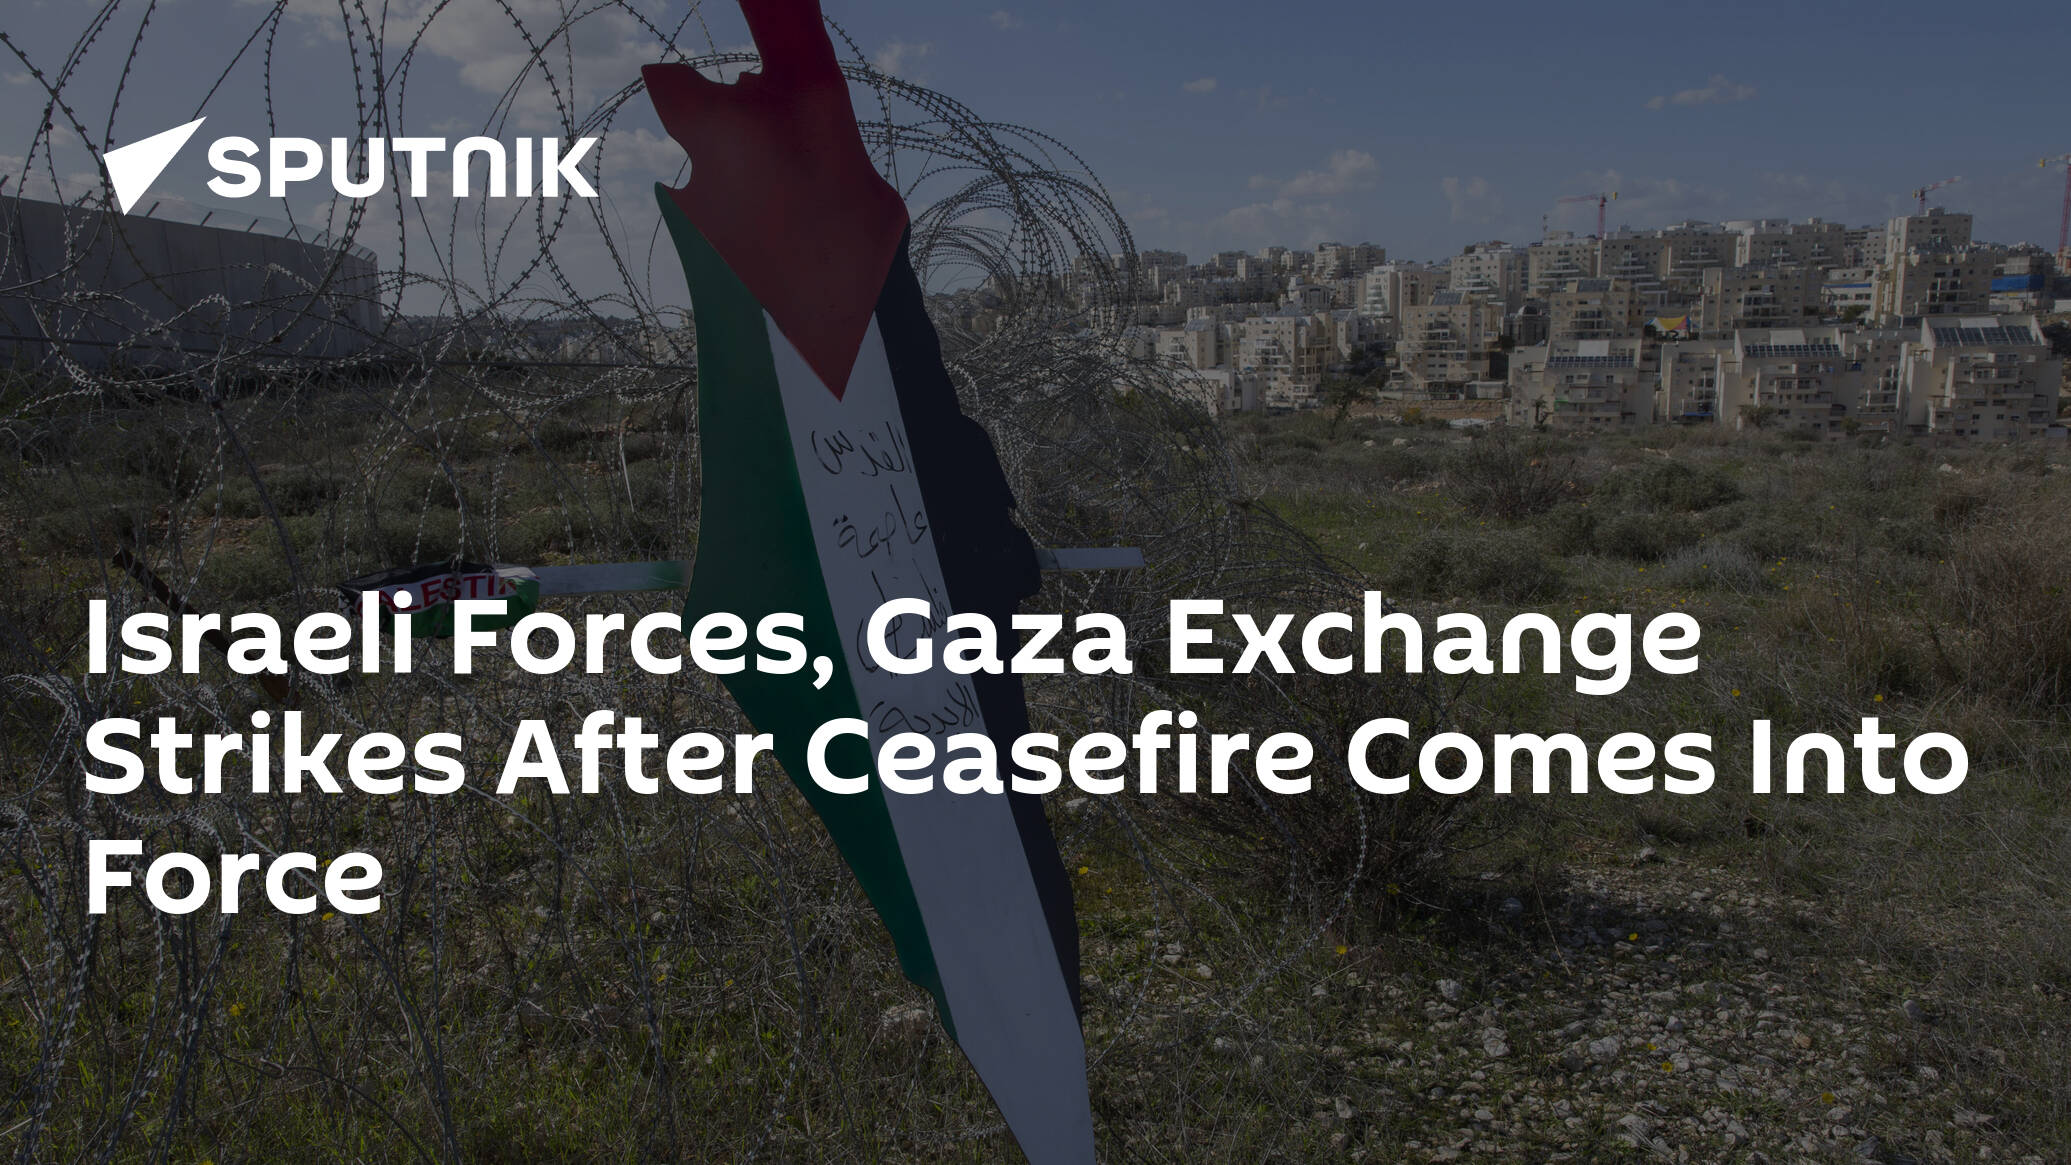 Israeli Forces, Gaza Exchange Strikes After Ceasefire Comes Into Force